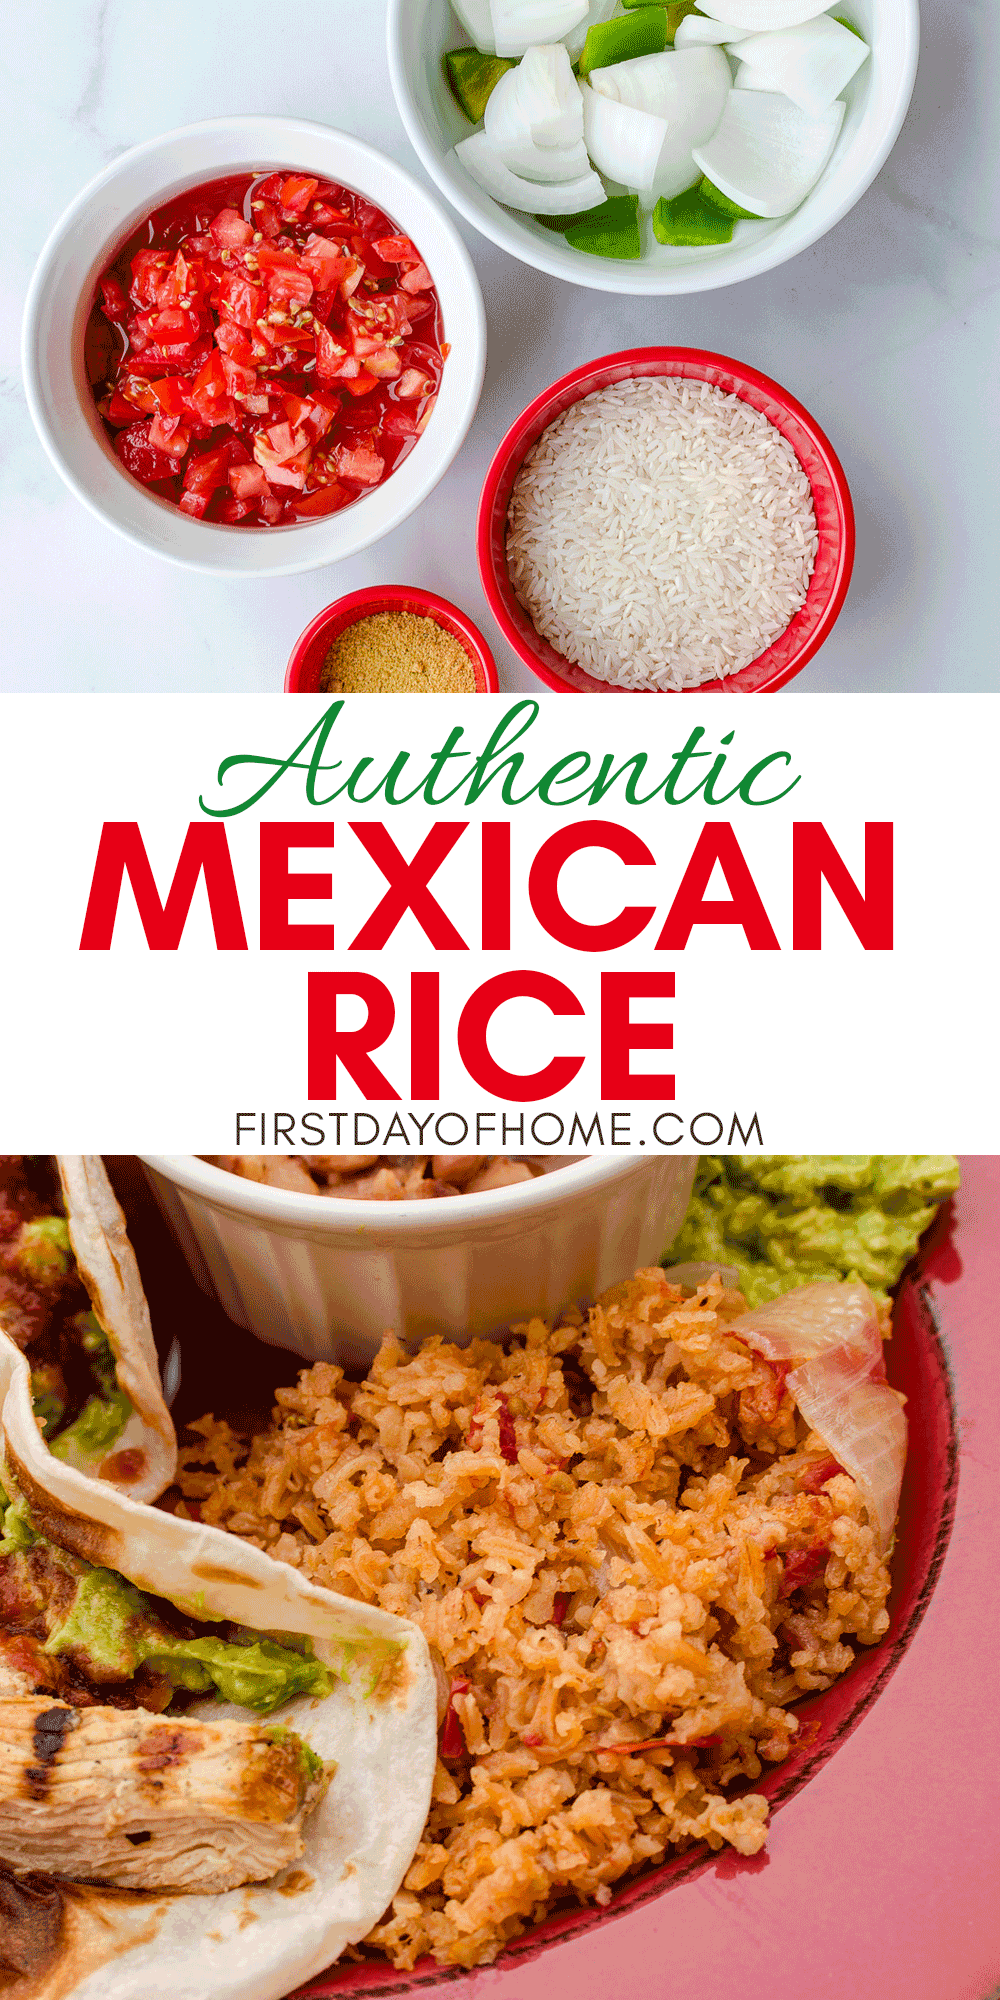 Mexican rice ingredients and finished rice served with chicken fajitas